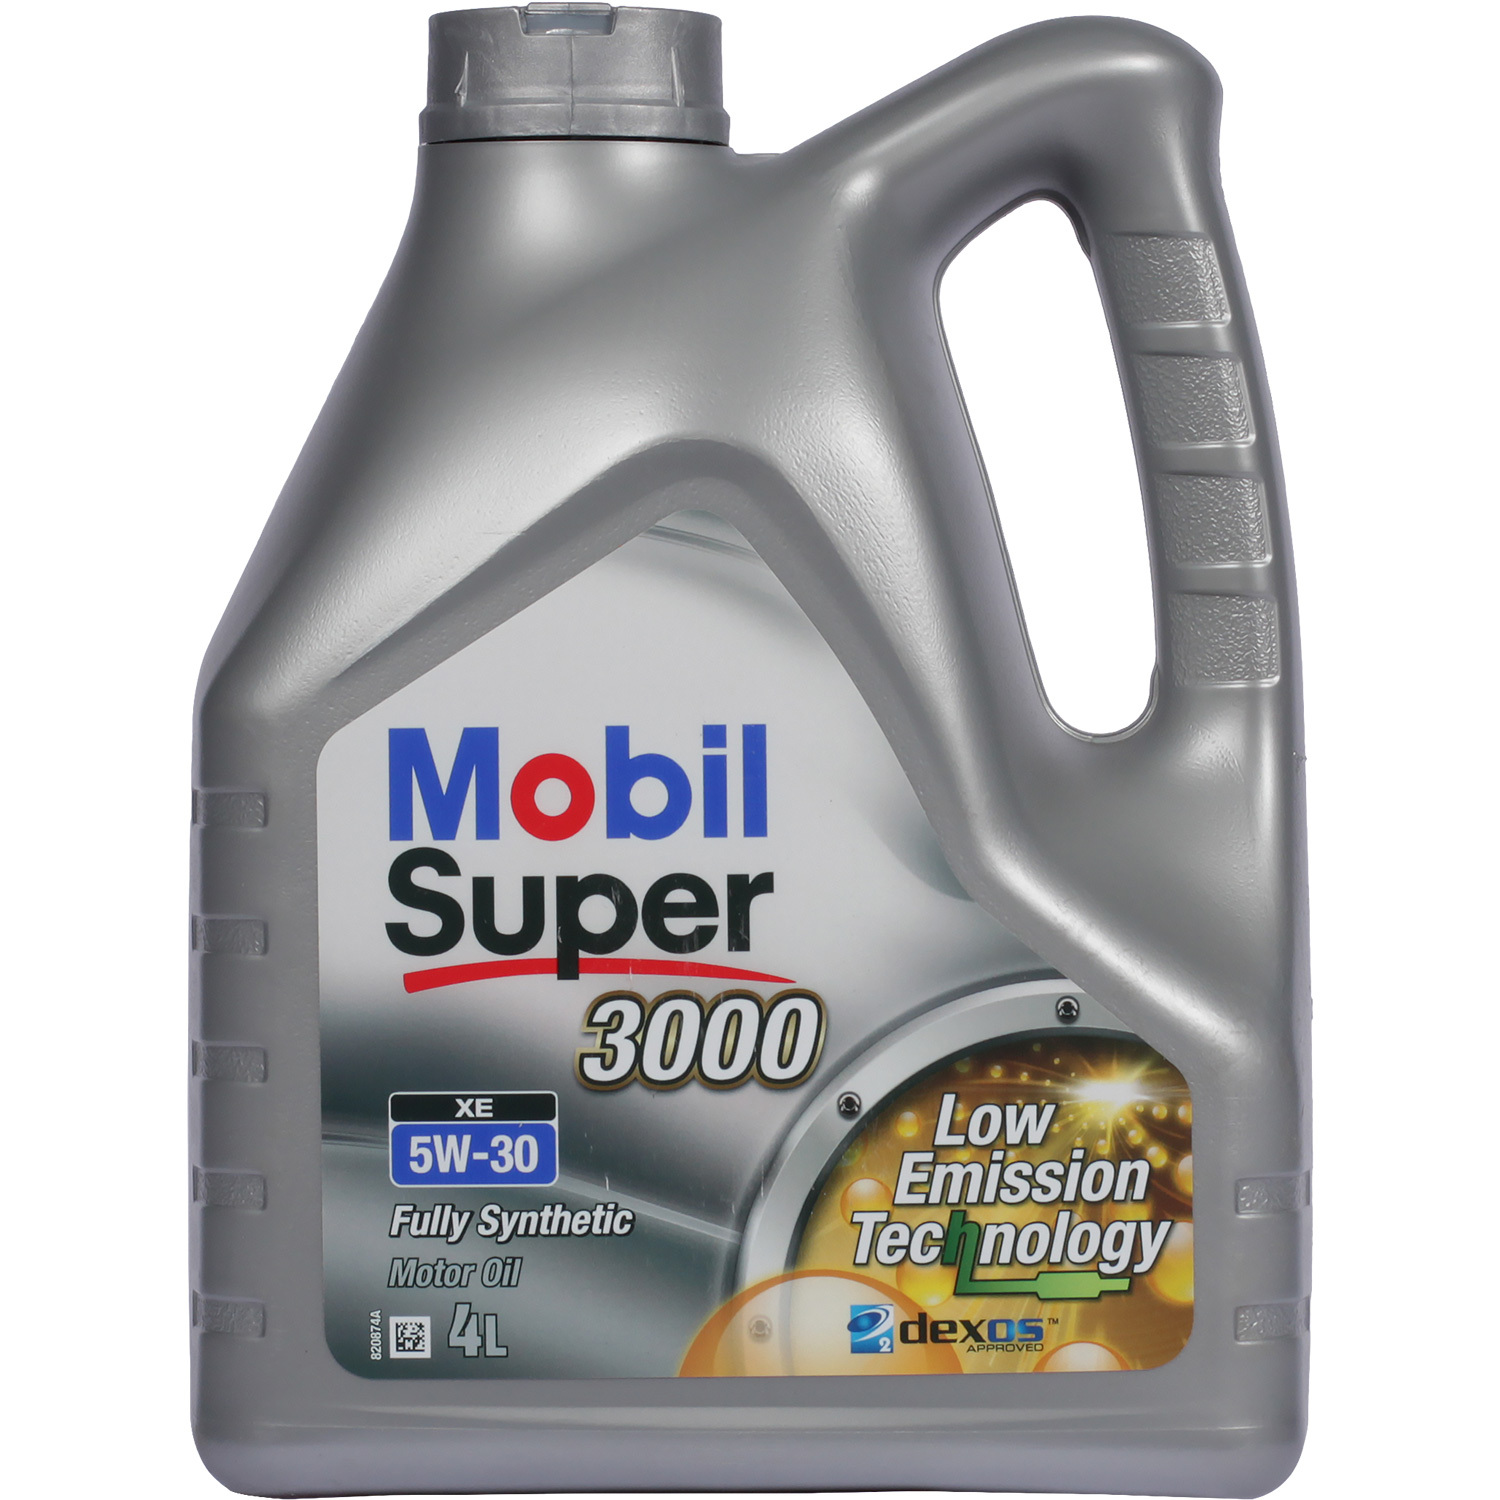 Mobil Моторное масло Mobil Super 3000 XE 5W-30, 4 л